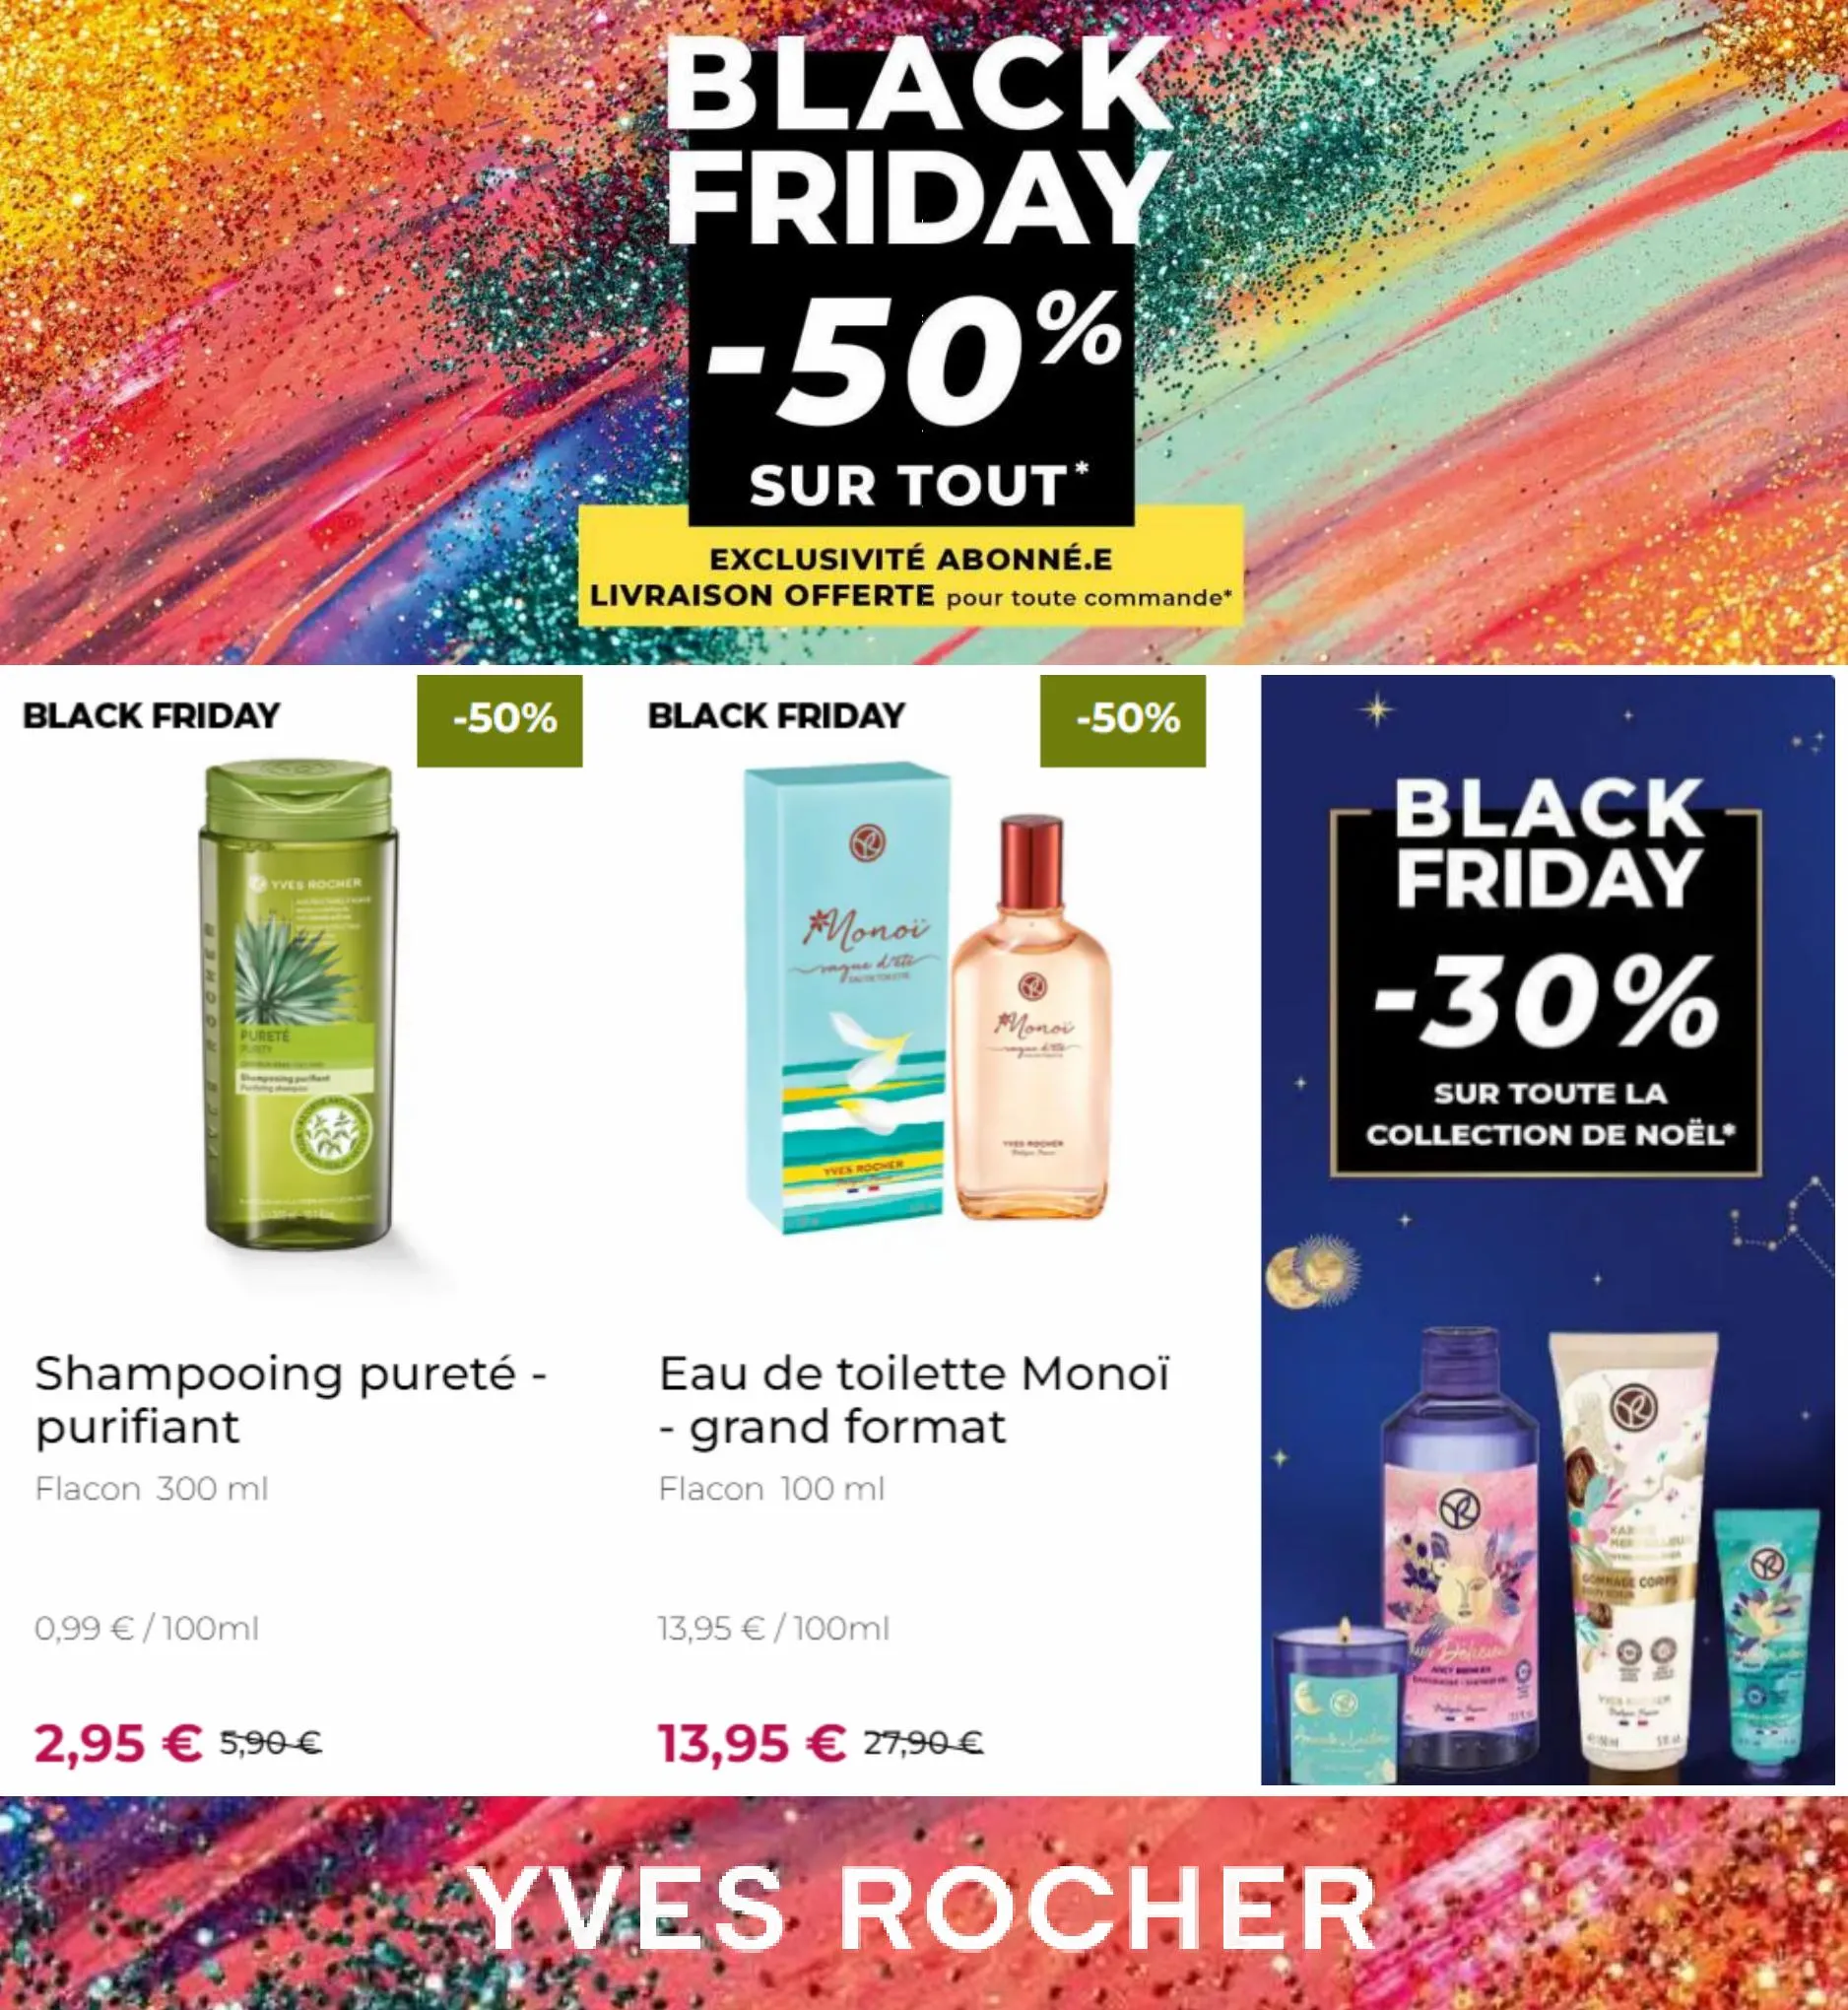 Catalogue Yves Rocher Black Friday, page 00009